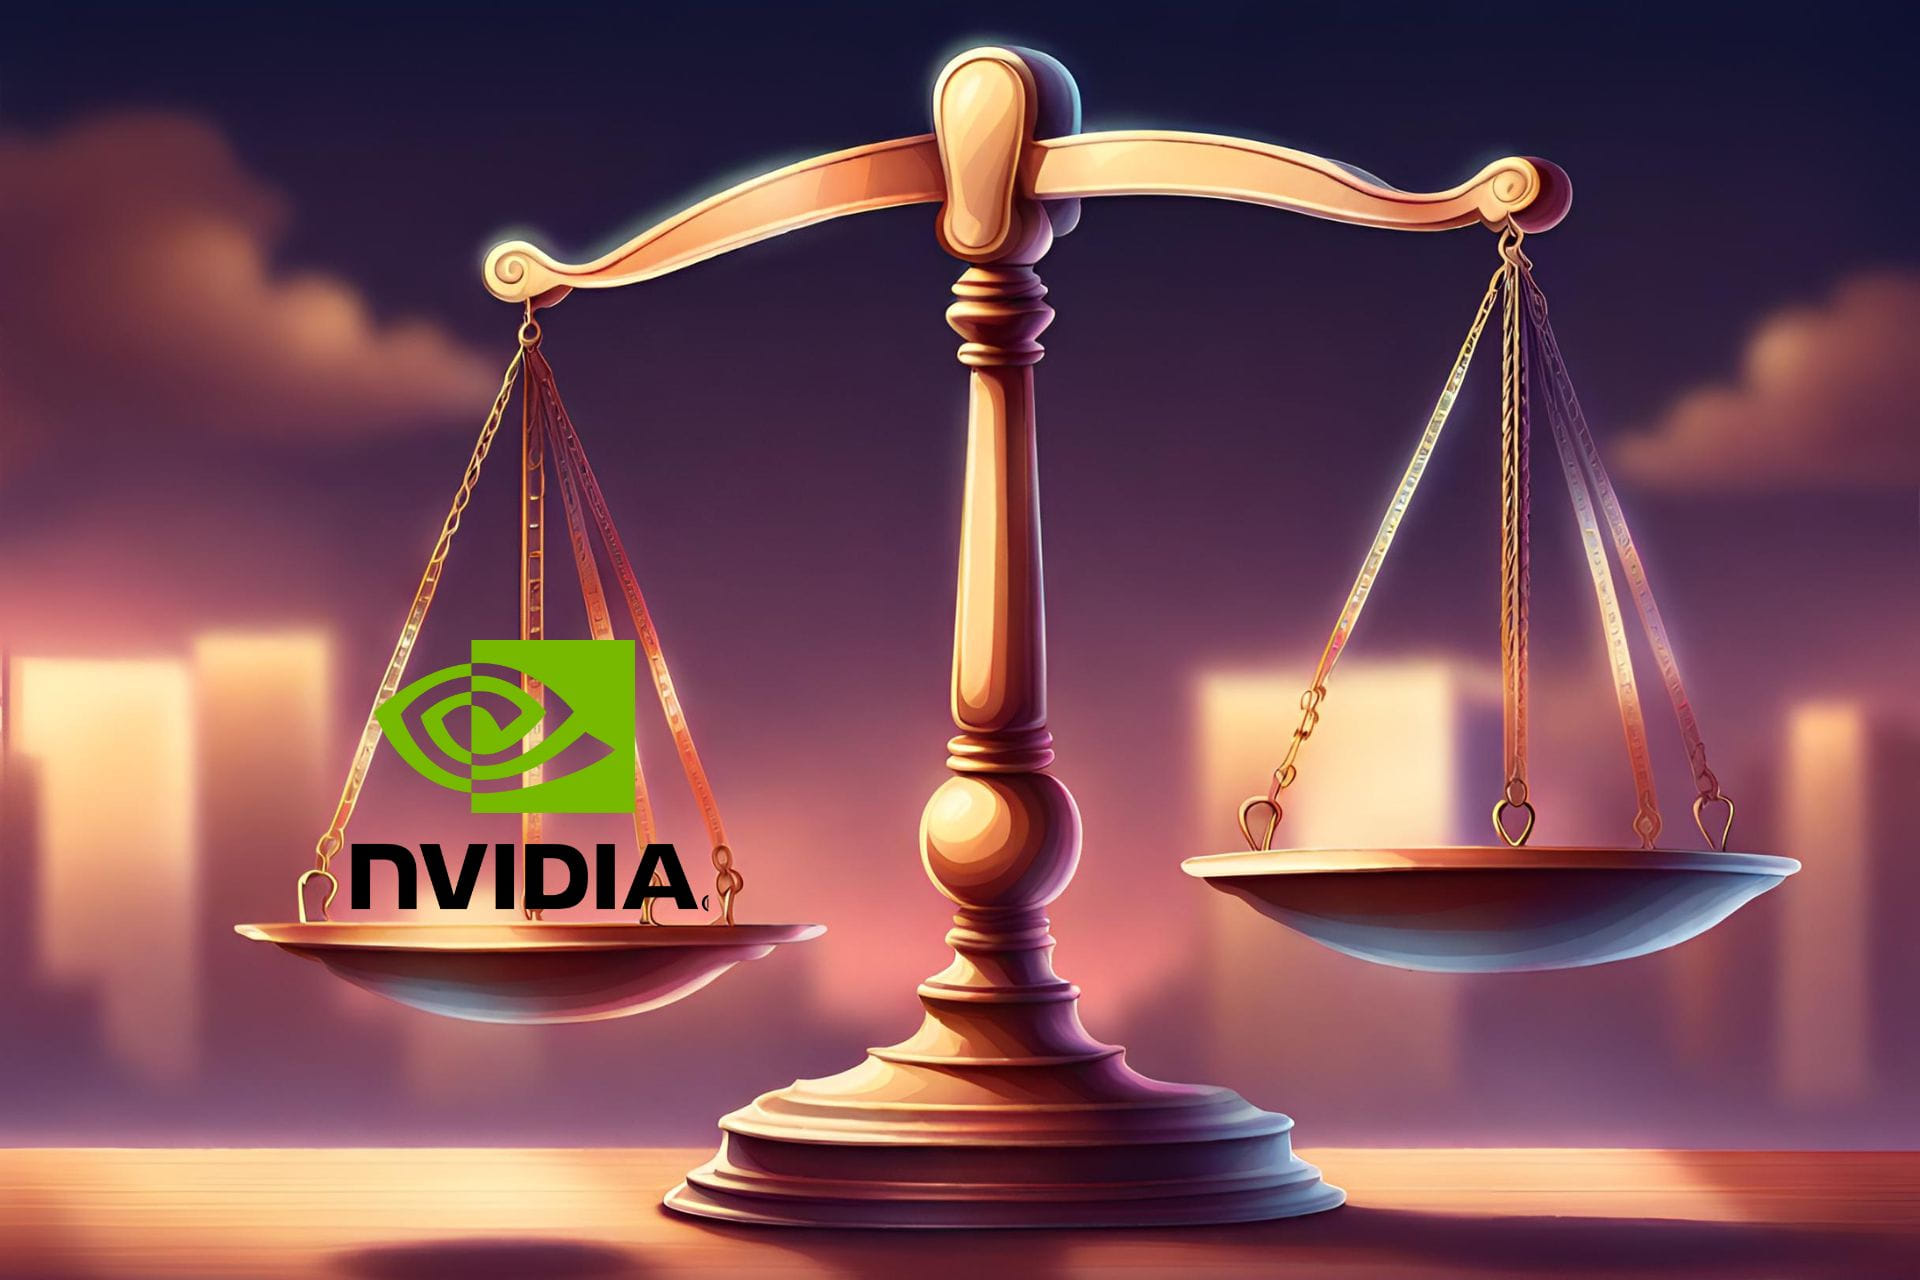 Nvidia AI Lawsuit represented by the Nvidia Logo and a scale